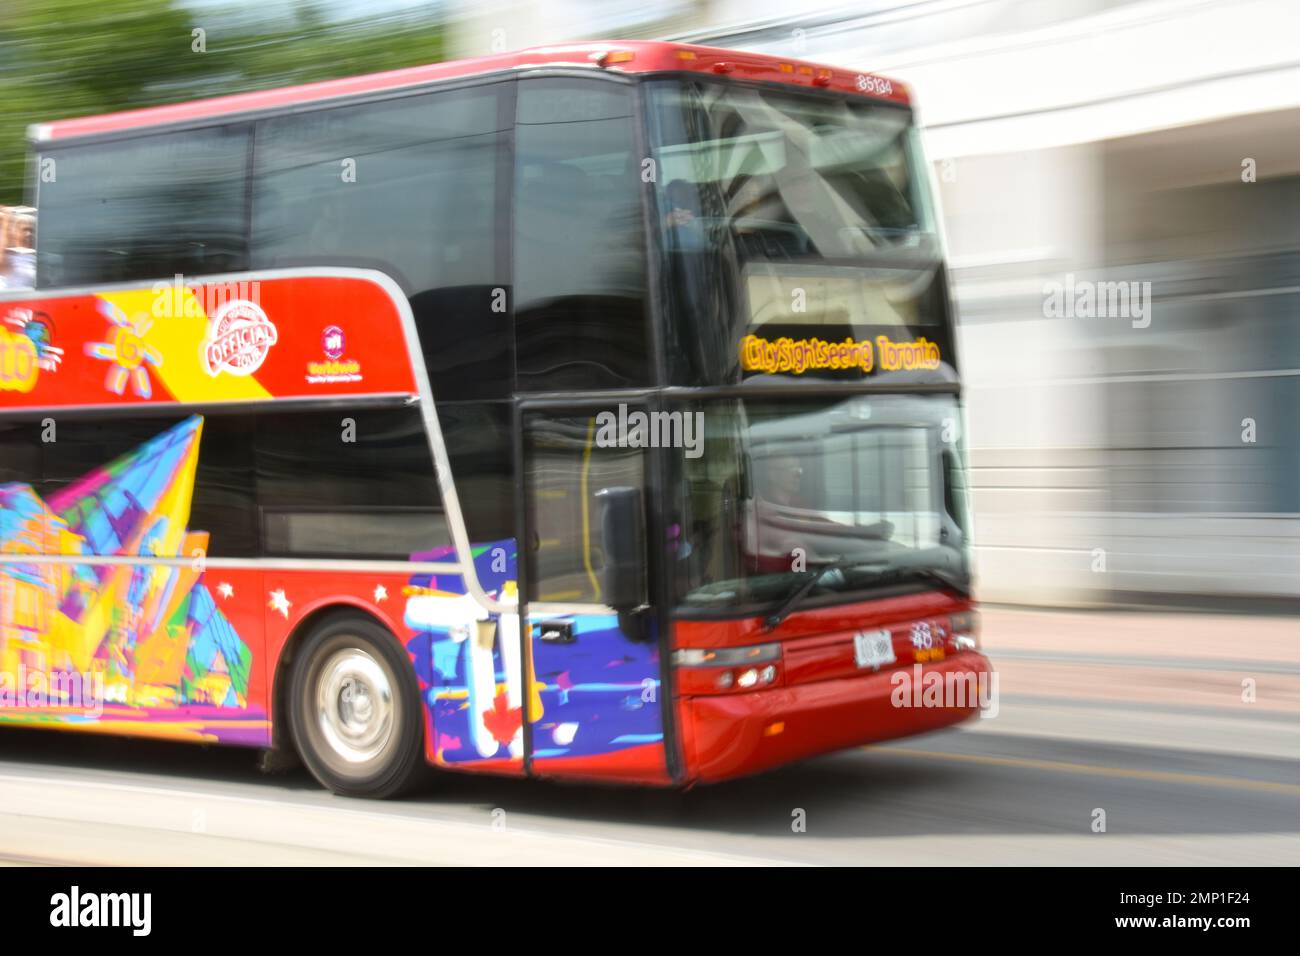 Bus, city sightseeing in Toronto, Canada Stock Photo